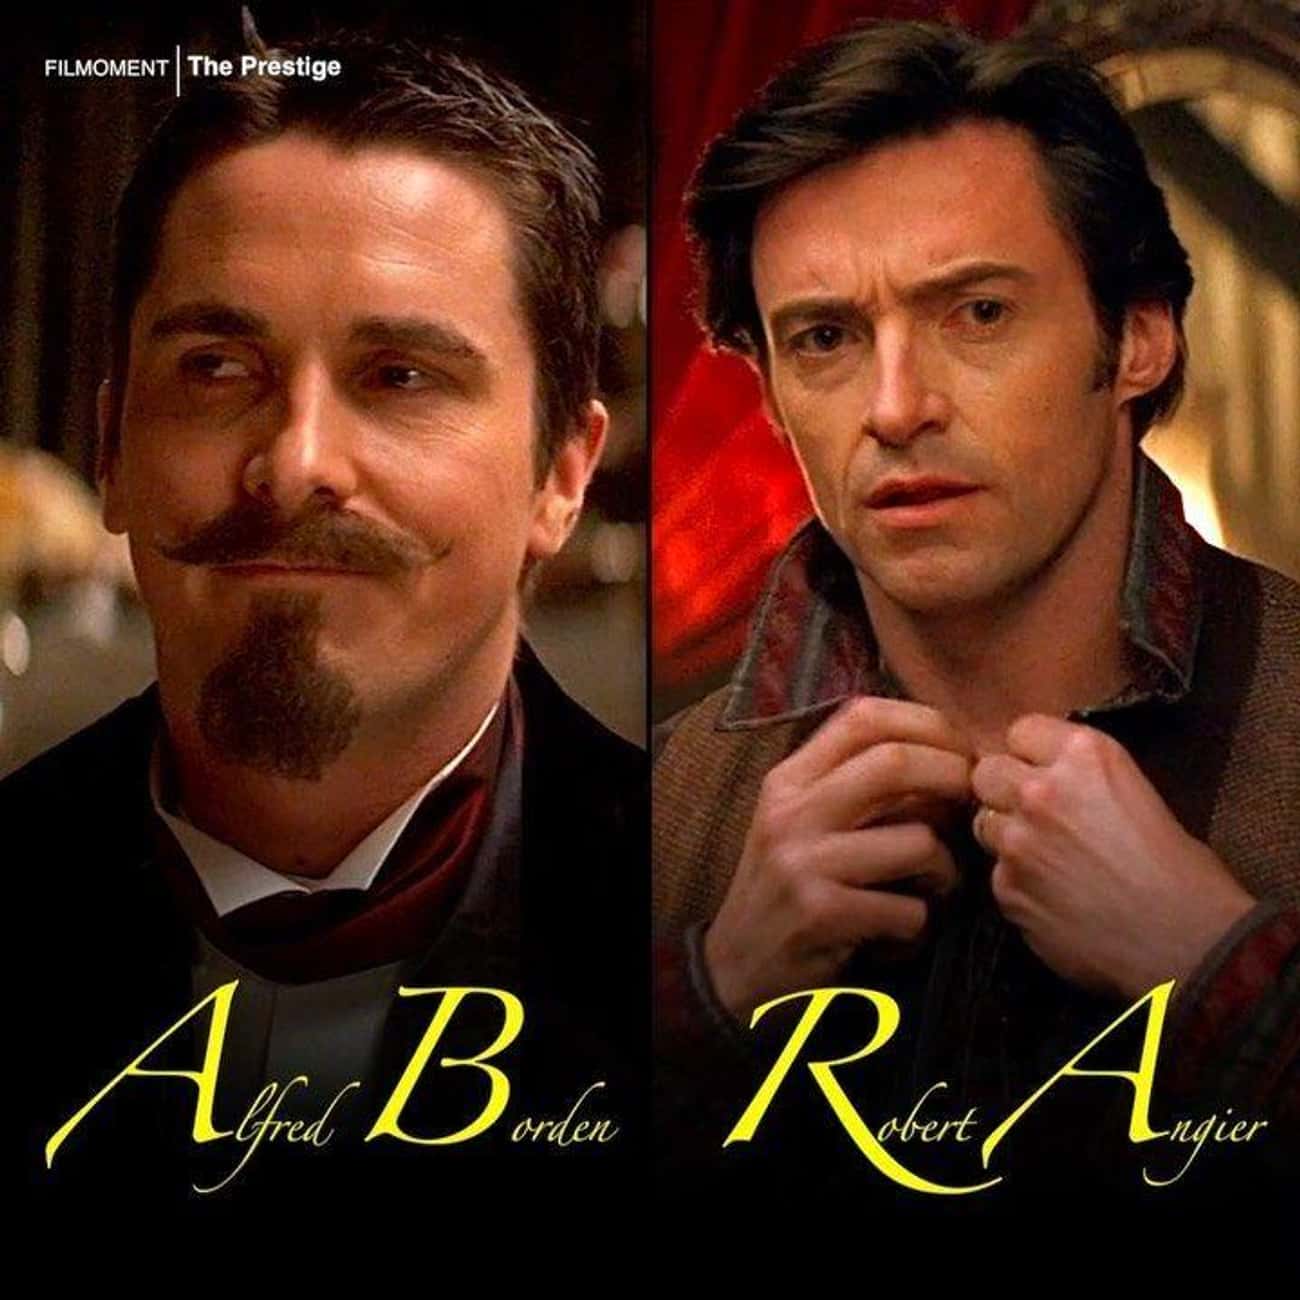 The Characters' Initials Spell 'ABRA'